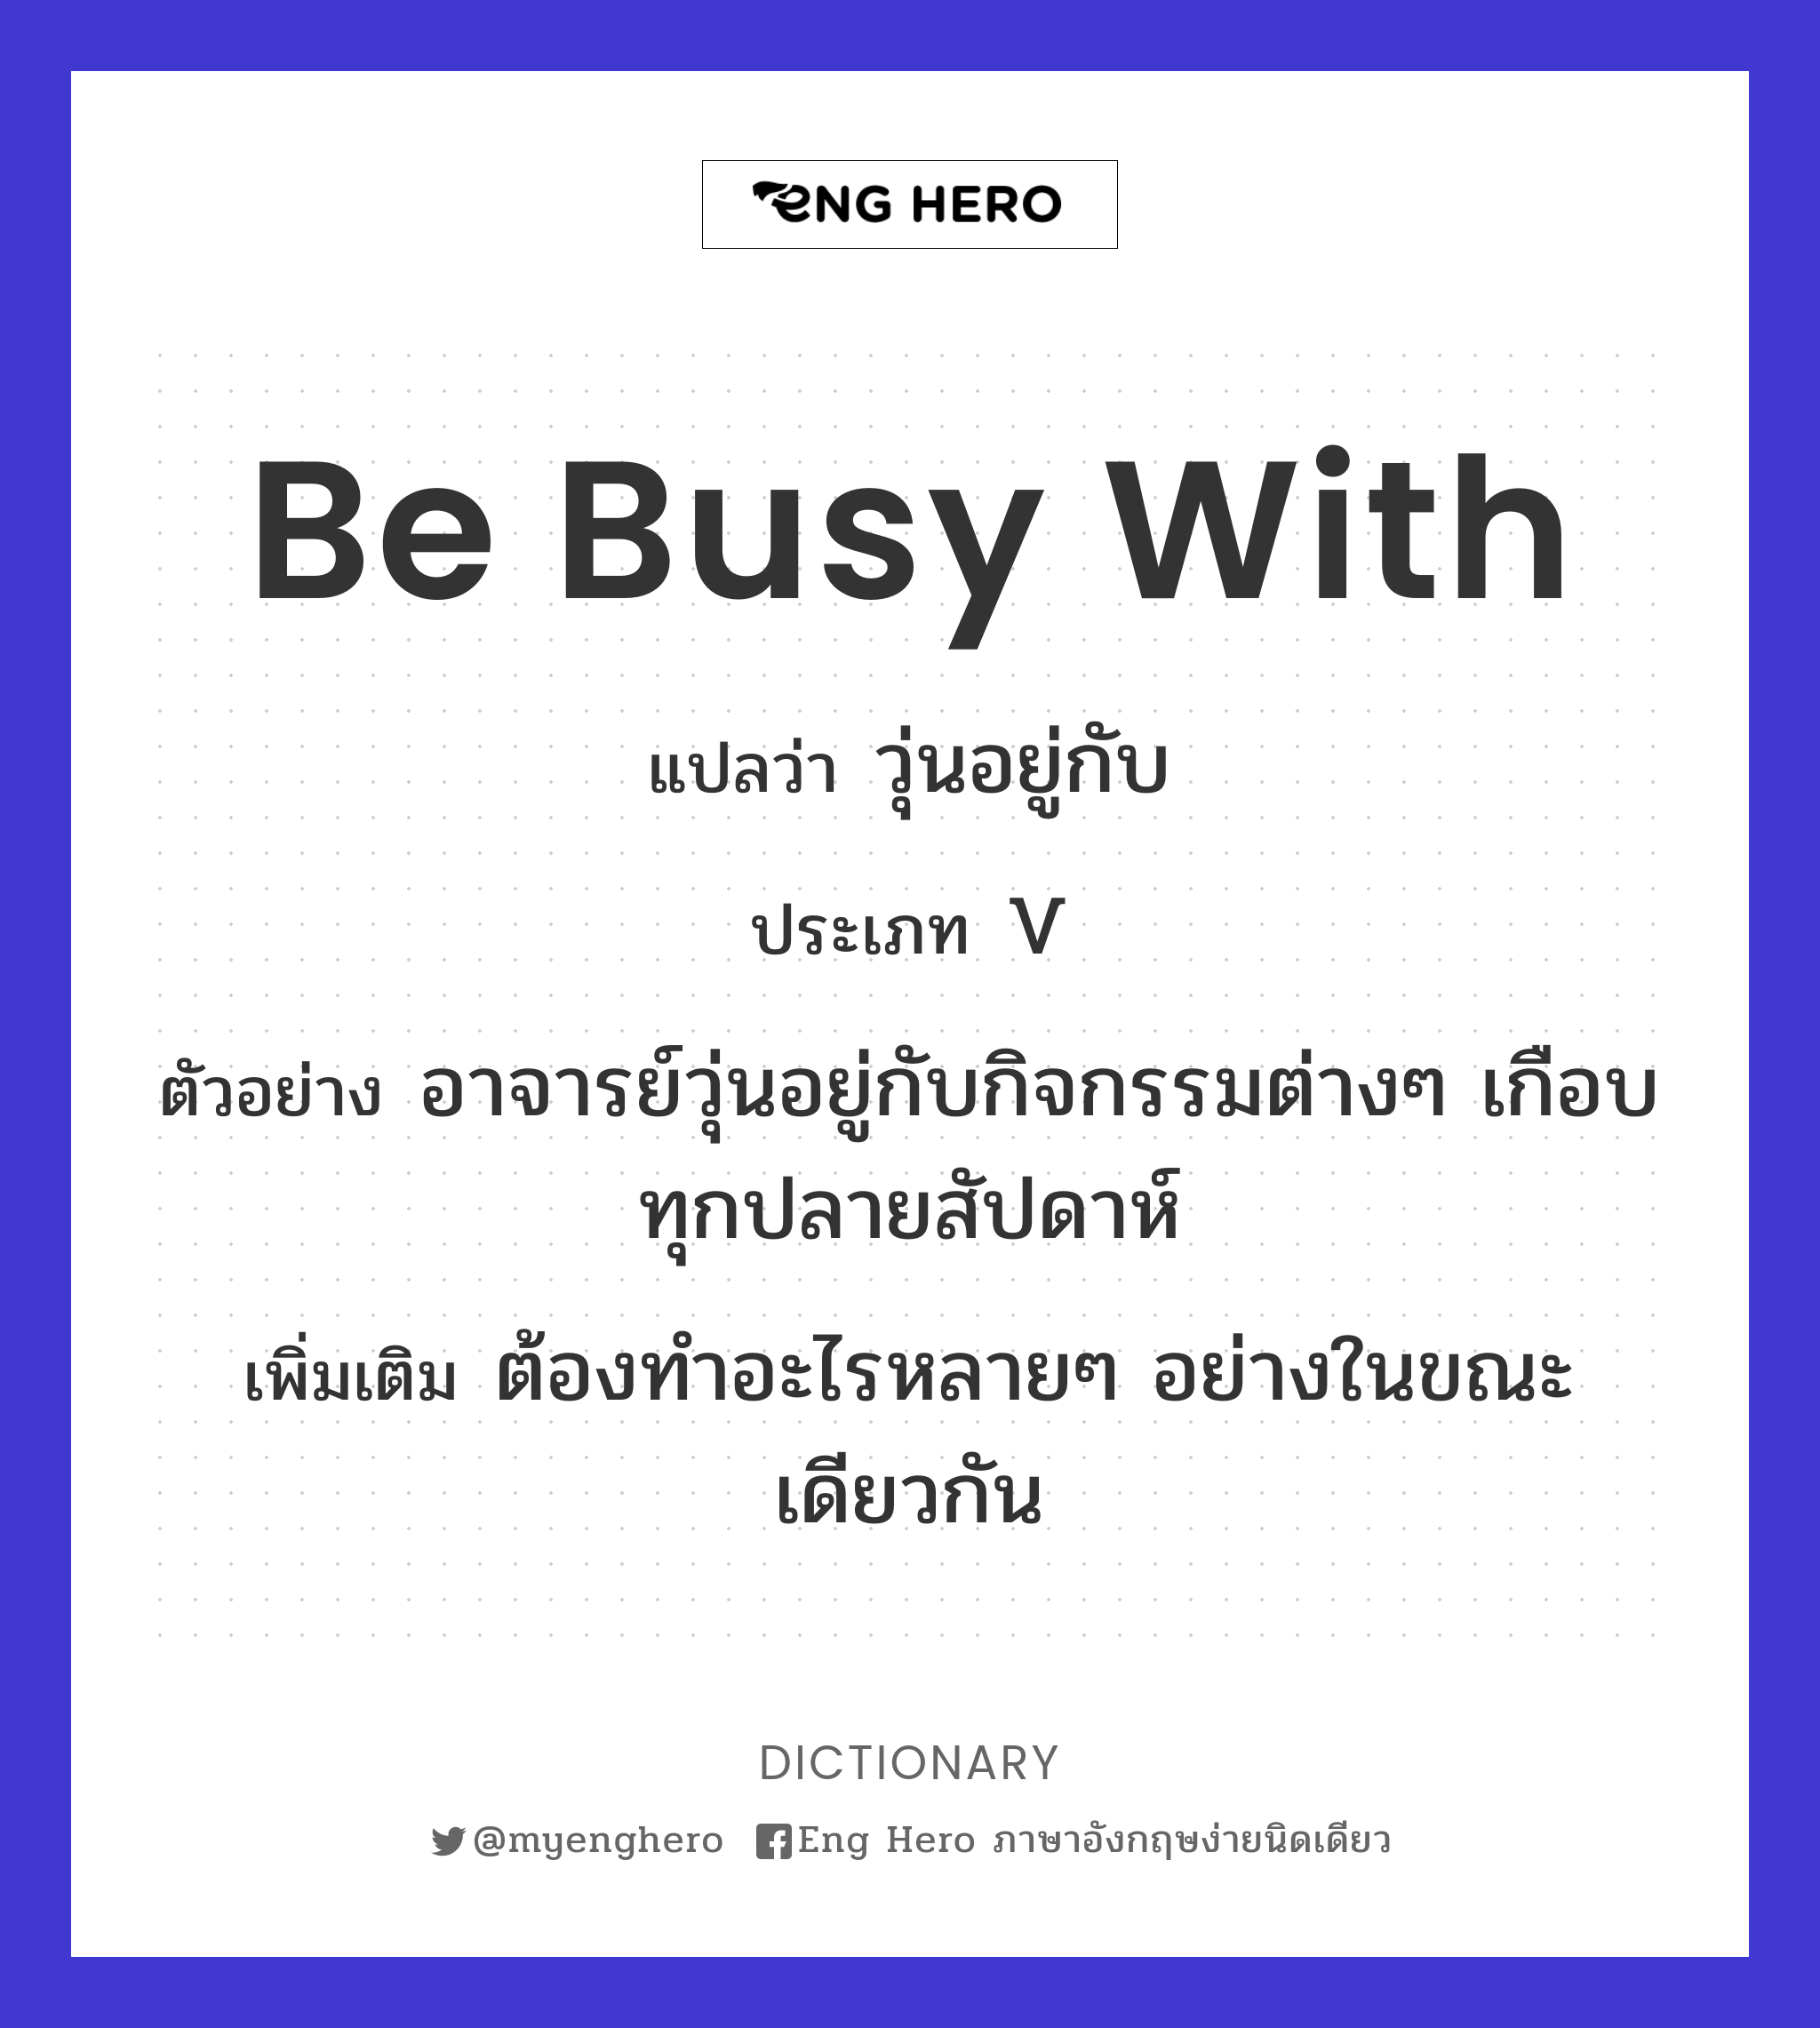 be busy with